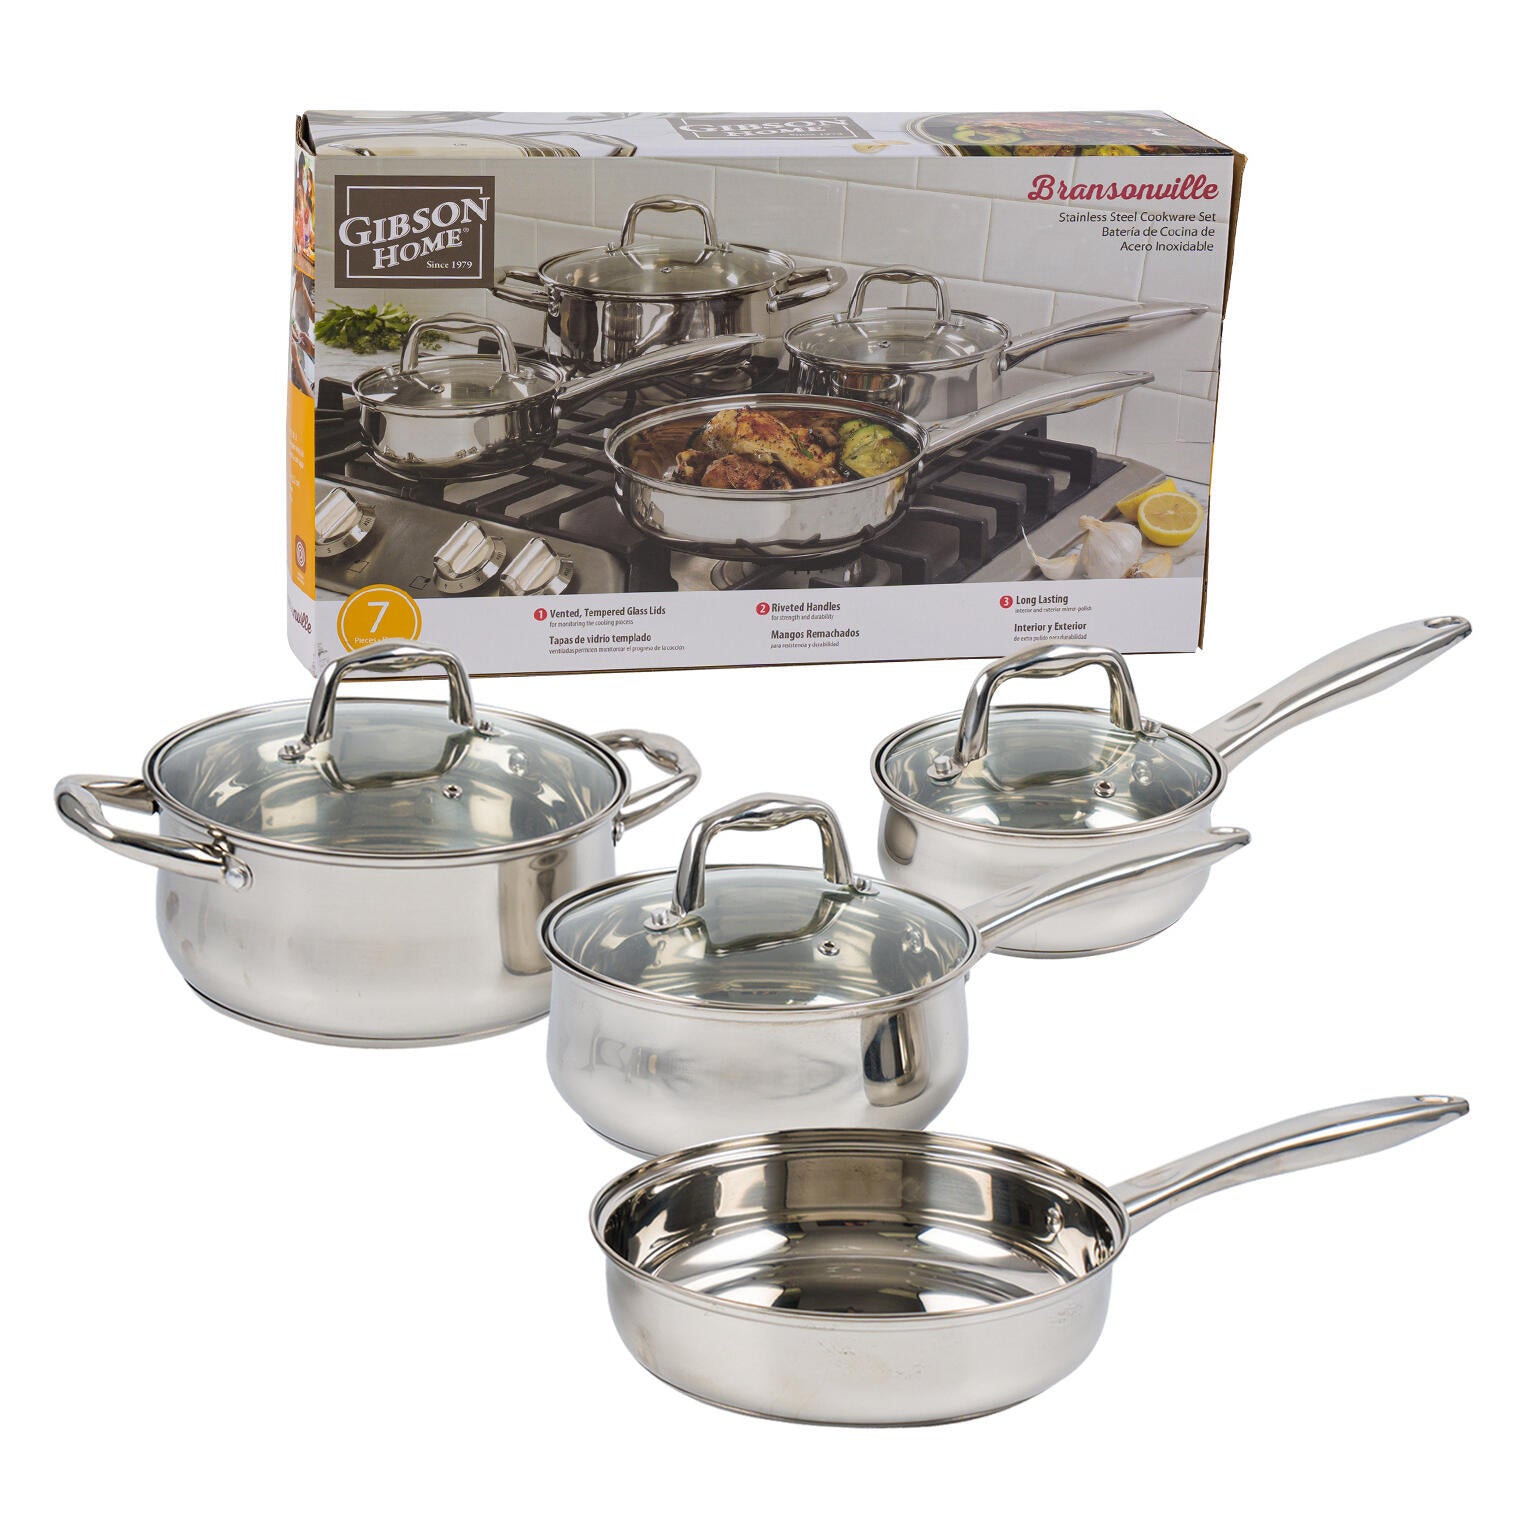 Gibson 7pc Stainless Steel Bellys Cookware Set